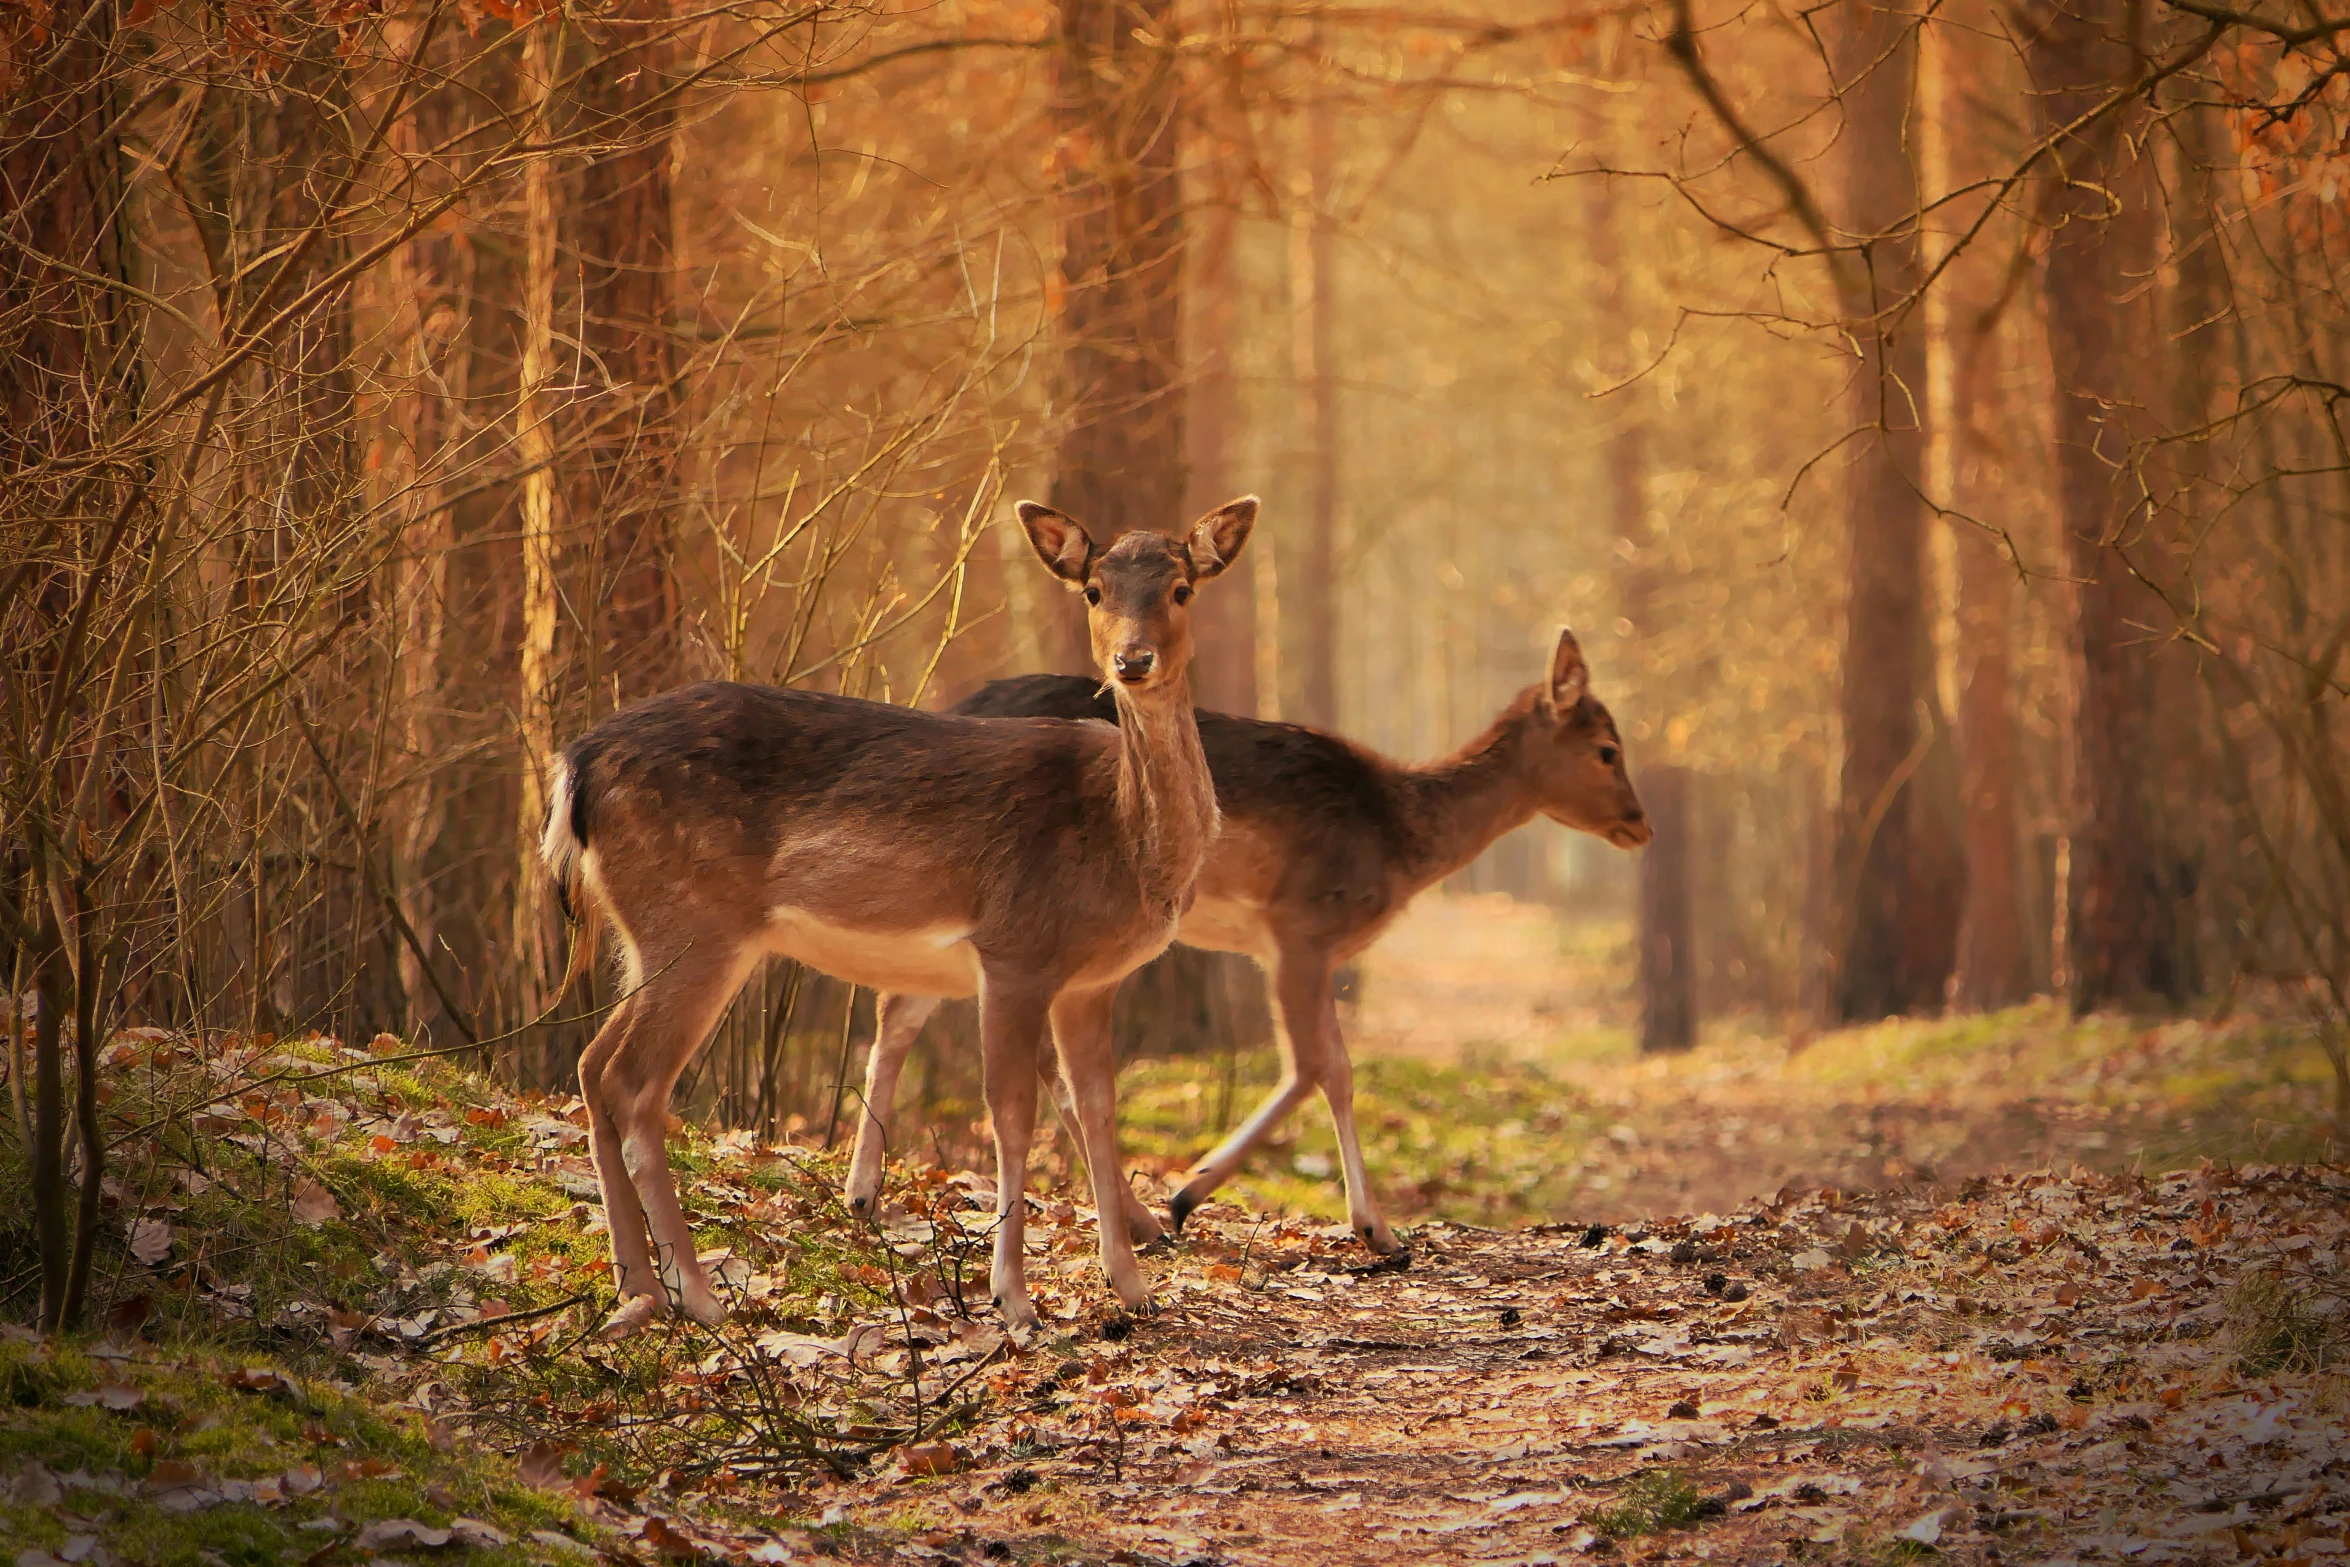 two deer in a forest near trees with autumn foliage